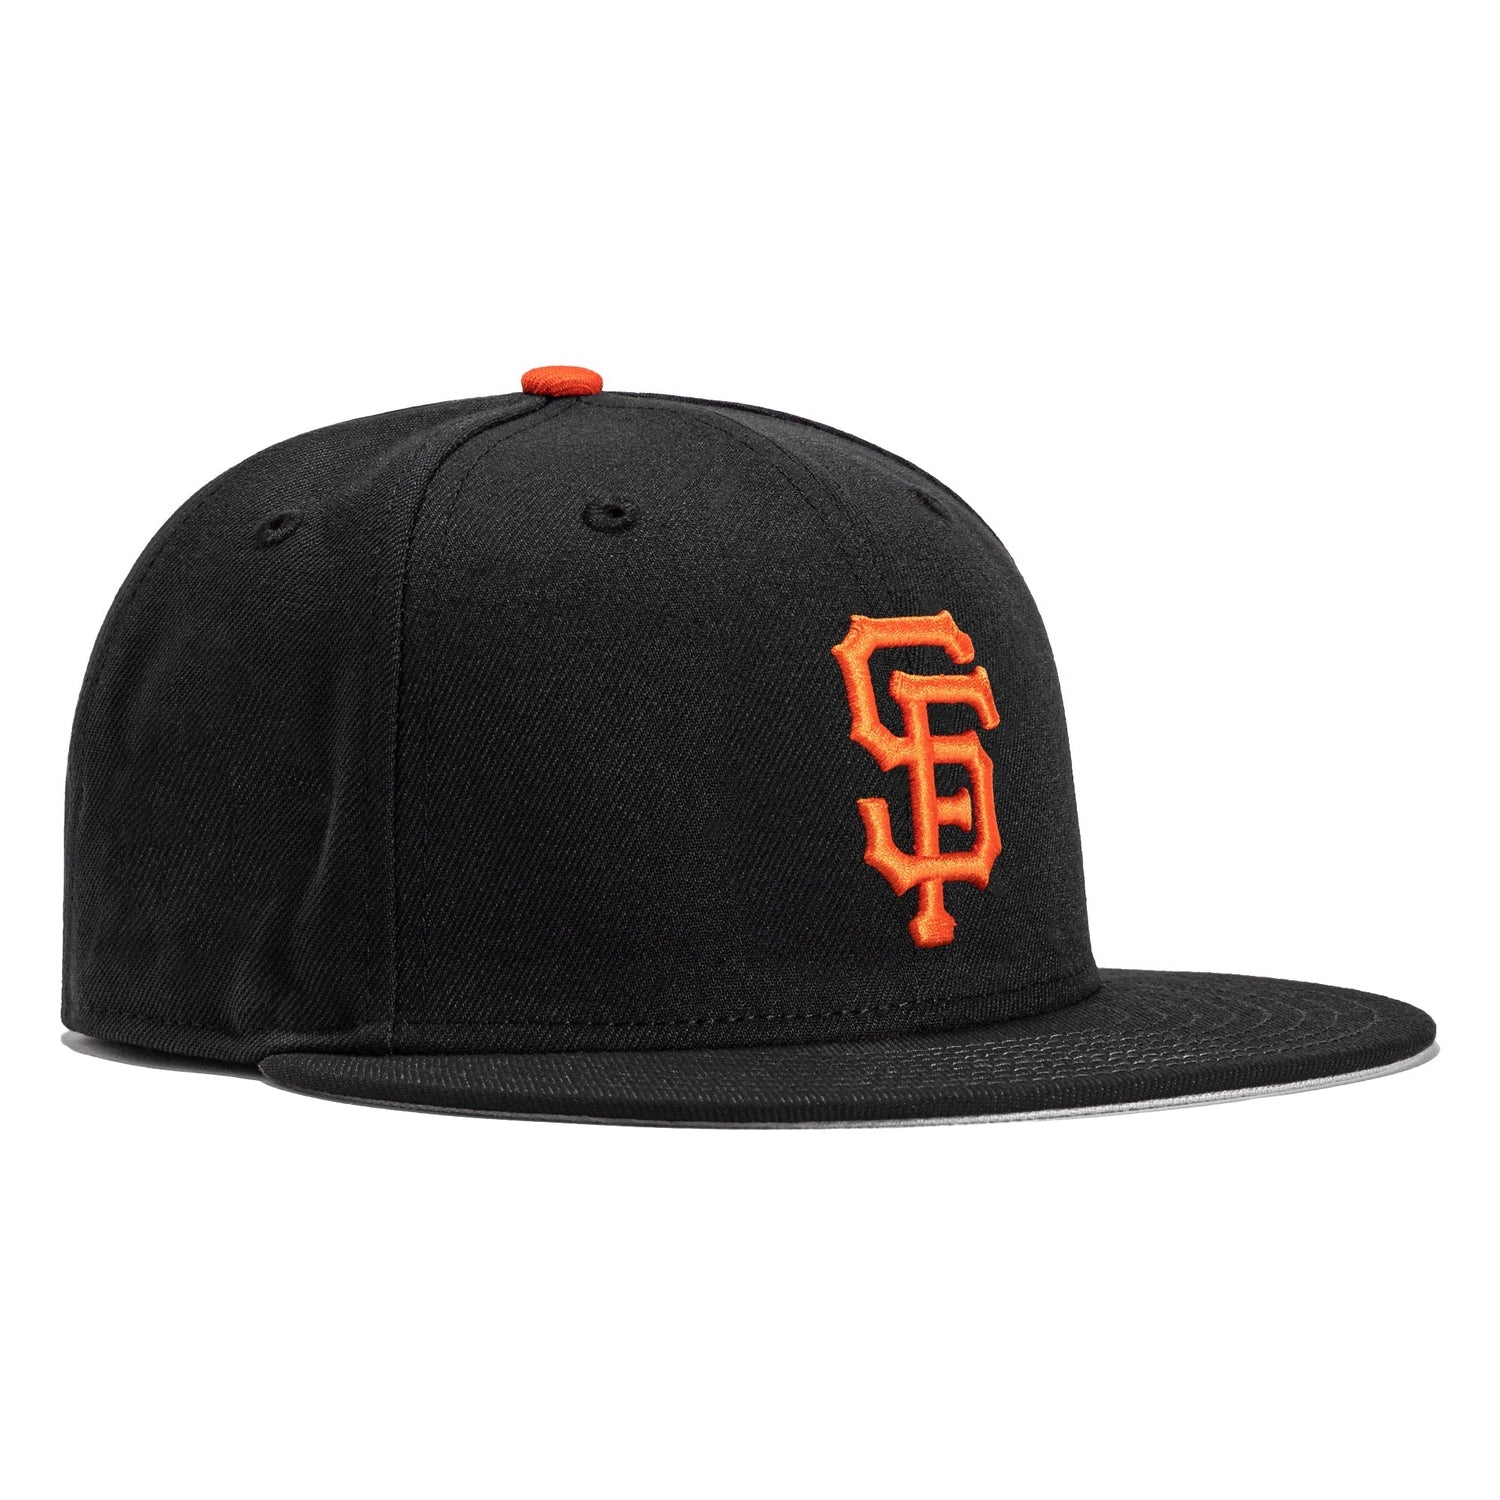 New Era San Francisco Giants 59FIFTY Fitted Hat, Black, Size: 7 1/2